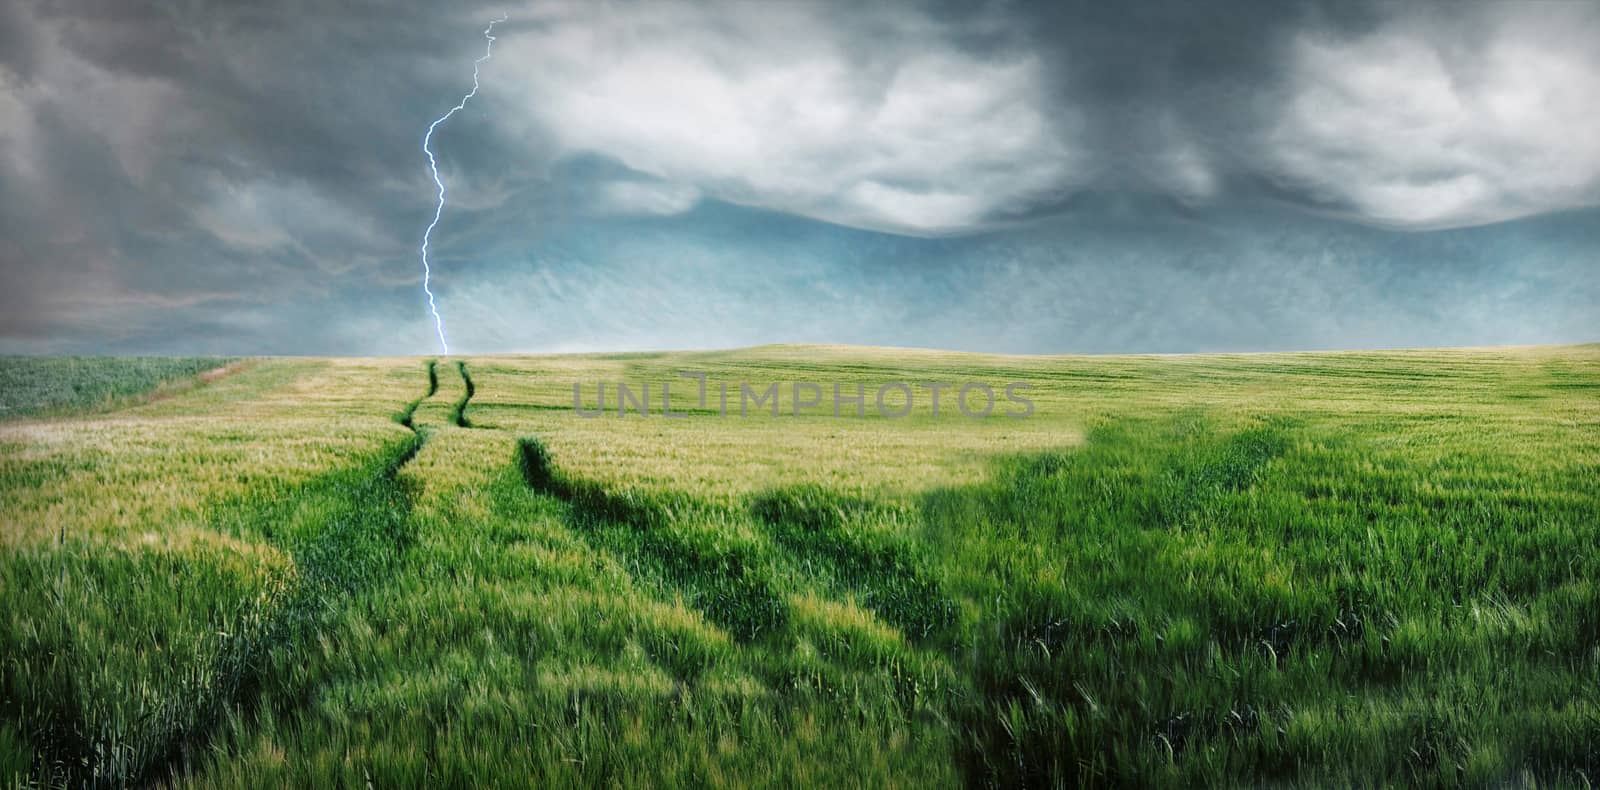 Storm with lightning over the green field.